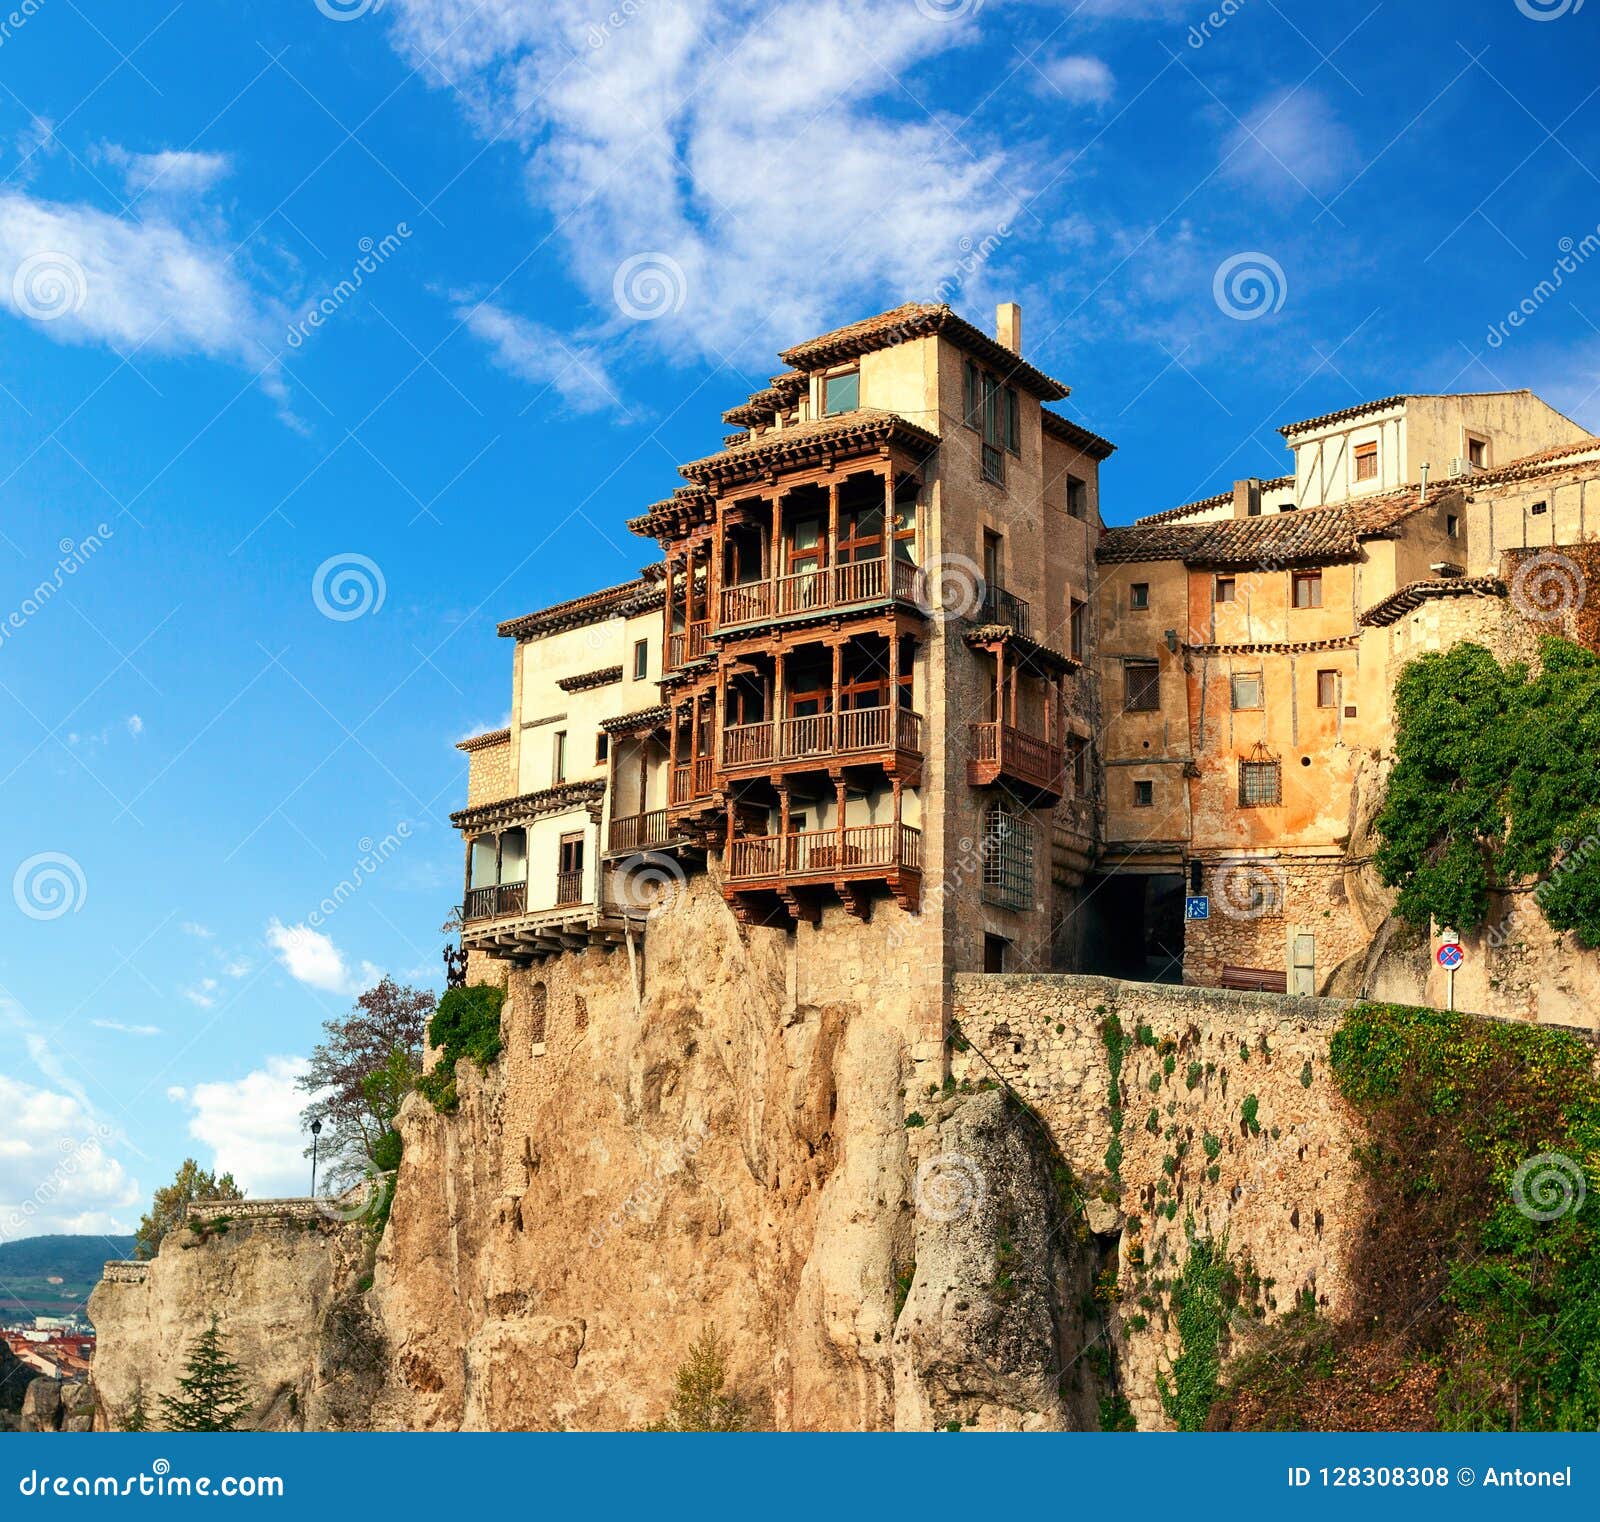 the casas colgadas hanging houses. hanging houses in the medieval town of cuenca, castilla la mancha, spain